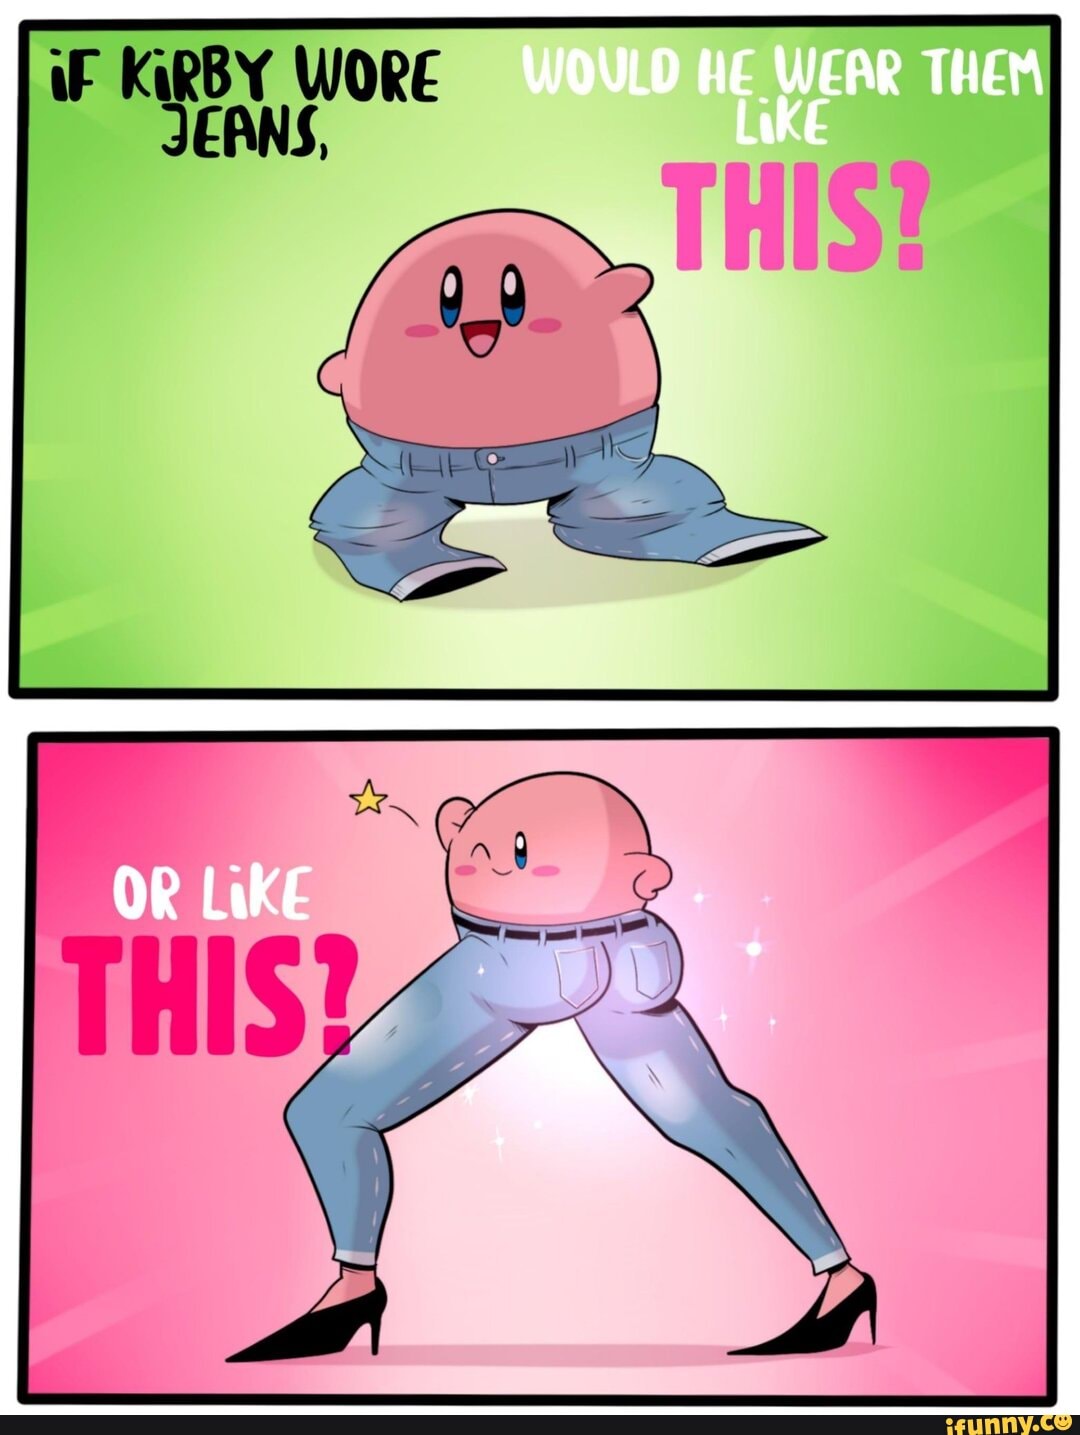 Poyo - iF KiRBY WORE JEANS, - iFunny